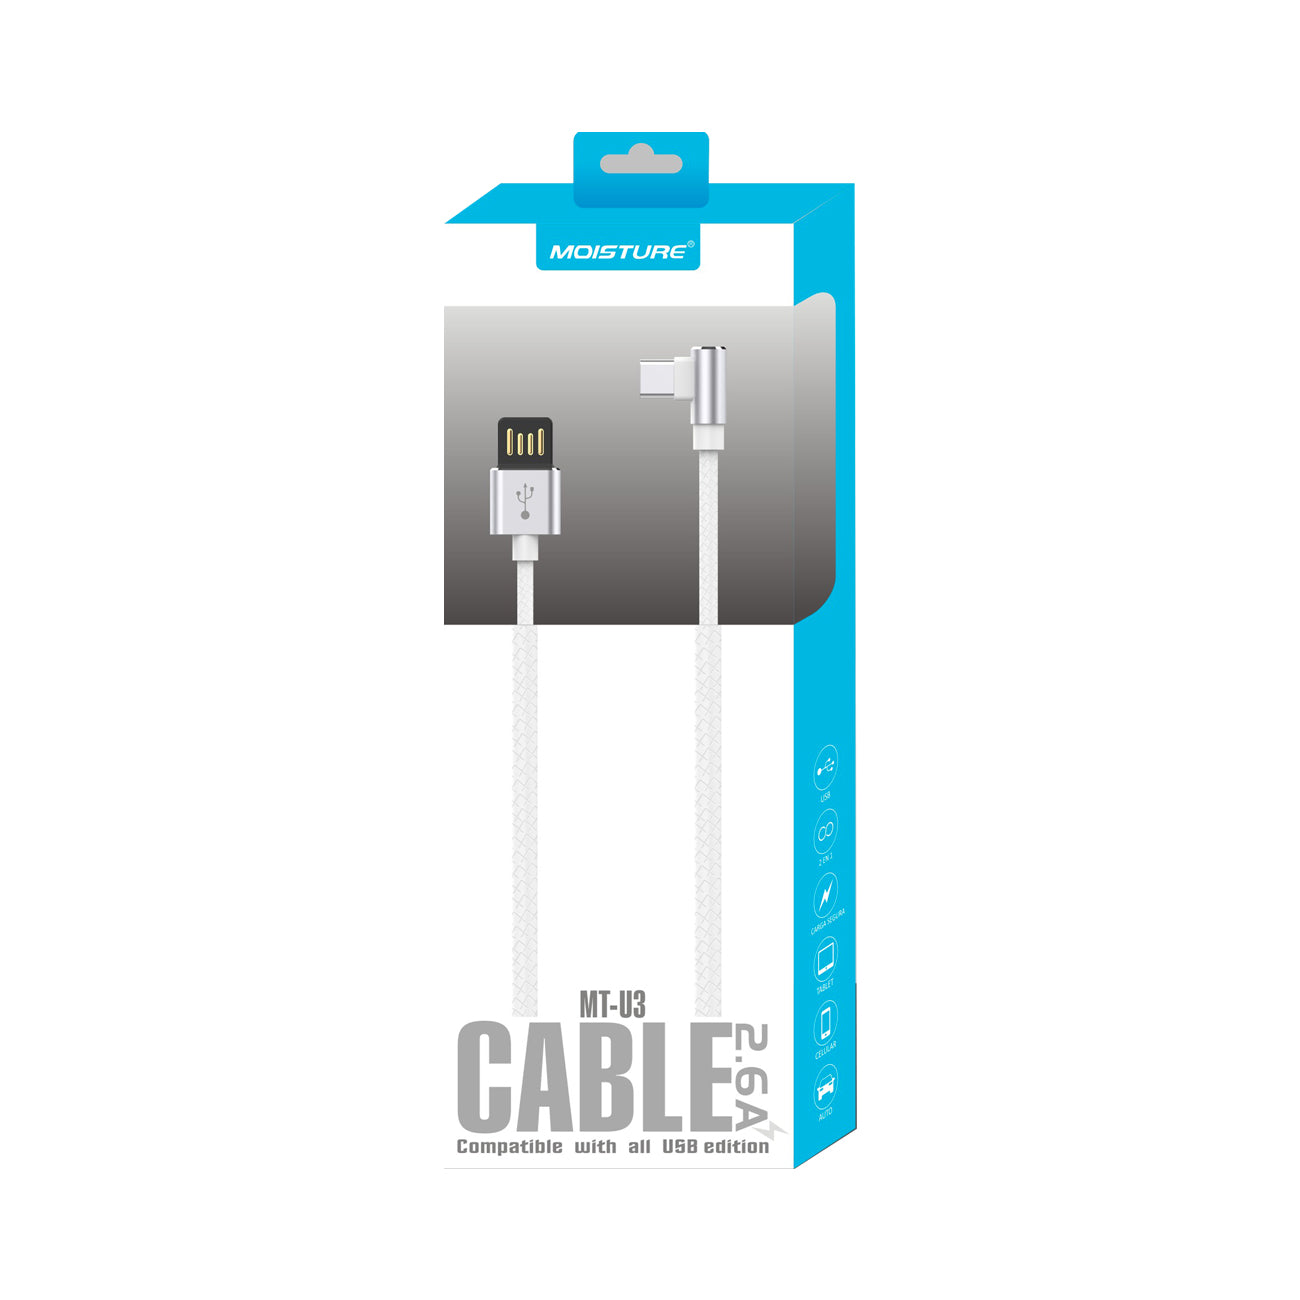 Cable USB Type C Premium Full Steel Moisture 2.6A Silver Color